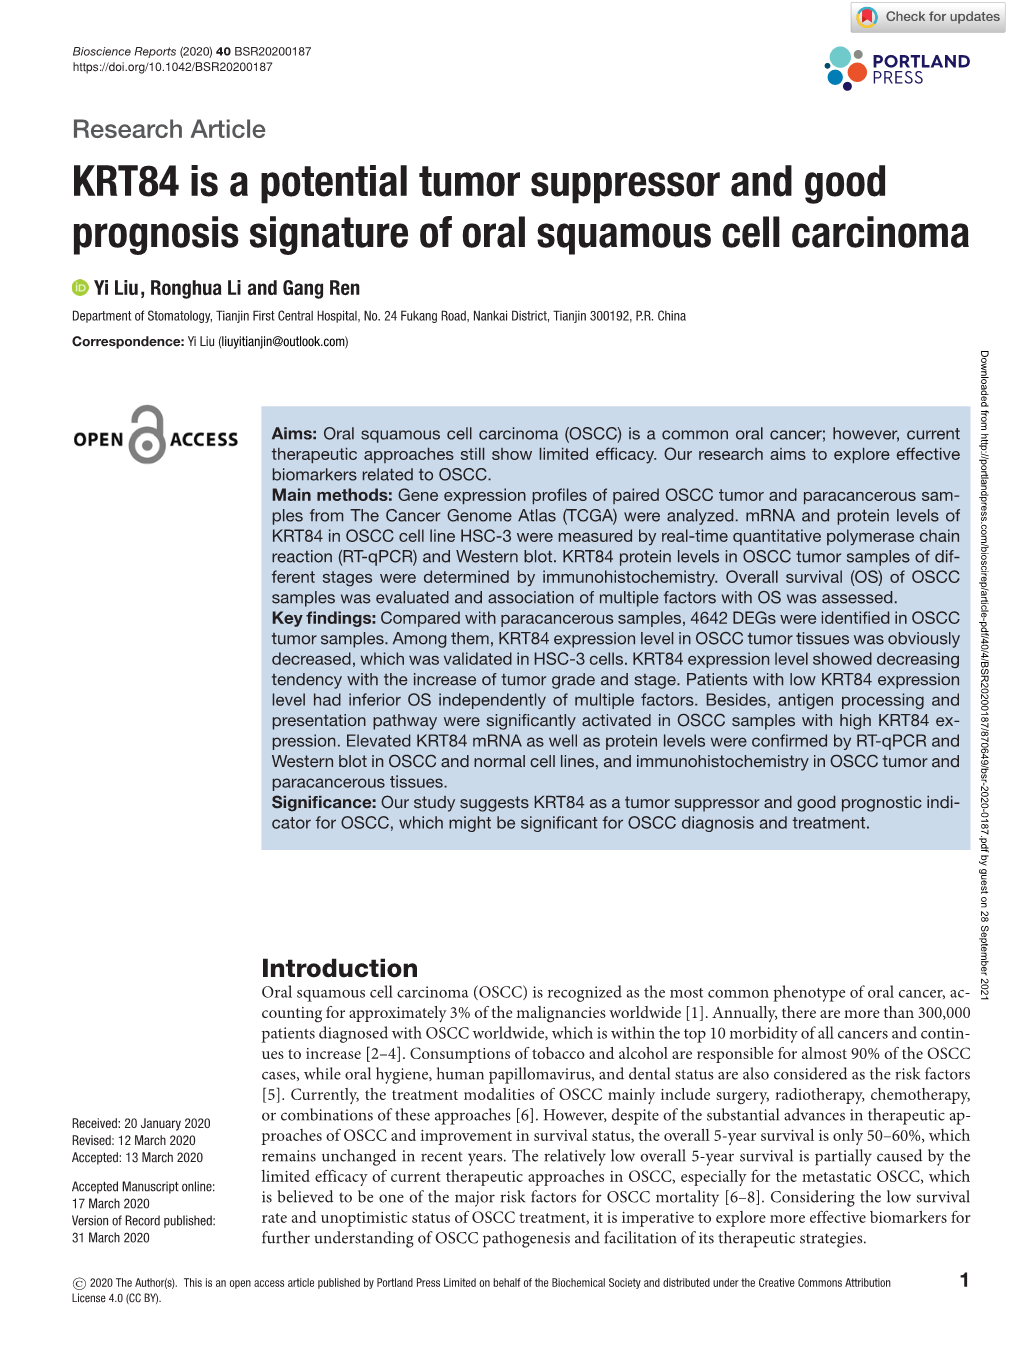 KRT84 Is a Potential Tumor Suppressor and Good Prognosis Signature of Oral Squamous Cell Carcinoma